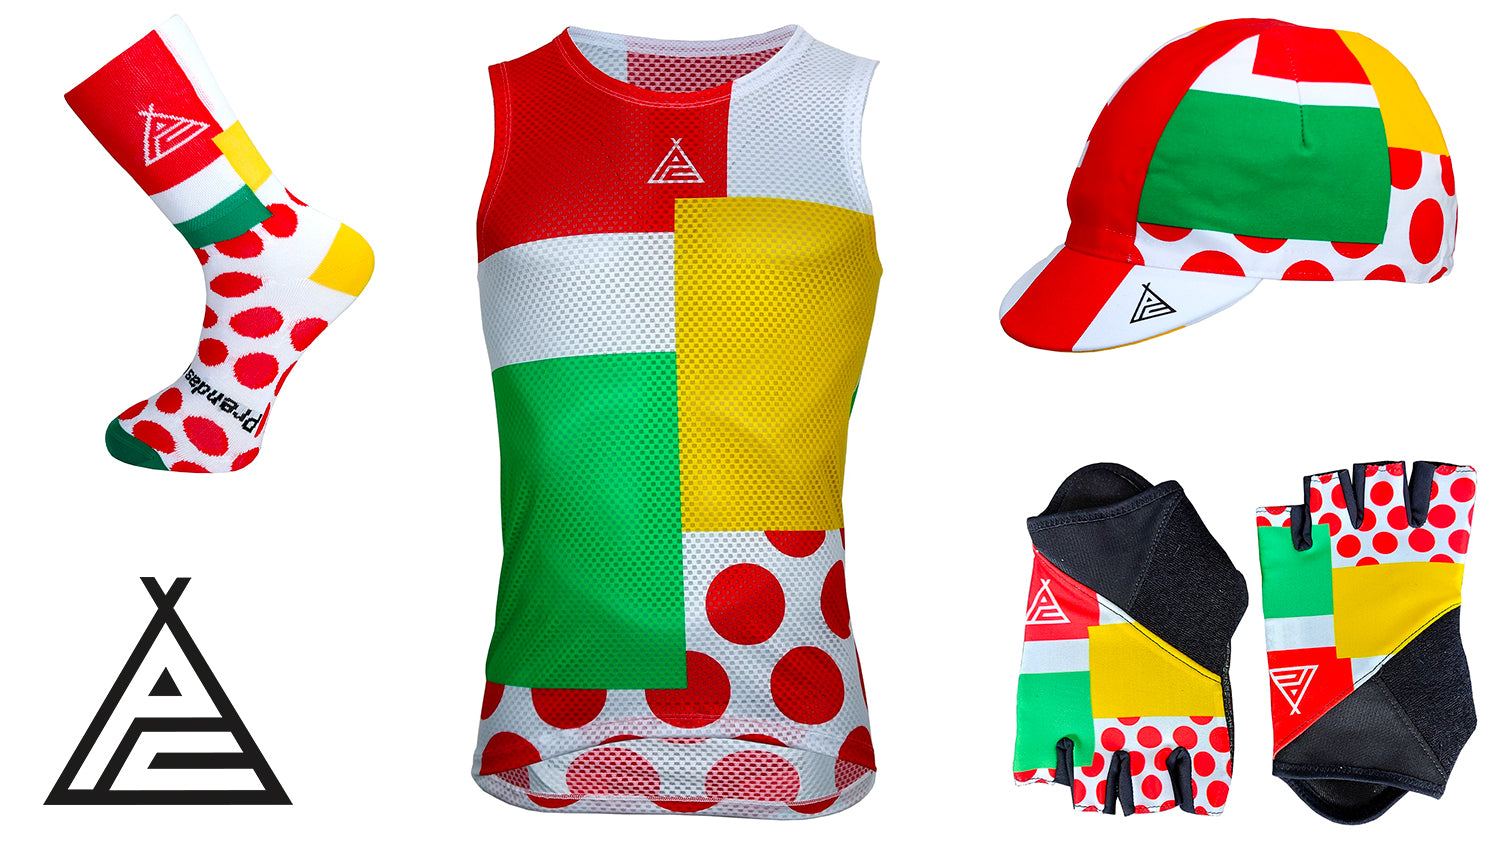 Buy the Combination Classification capsule collection available at Prendas Ciclismo